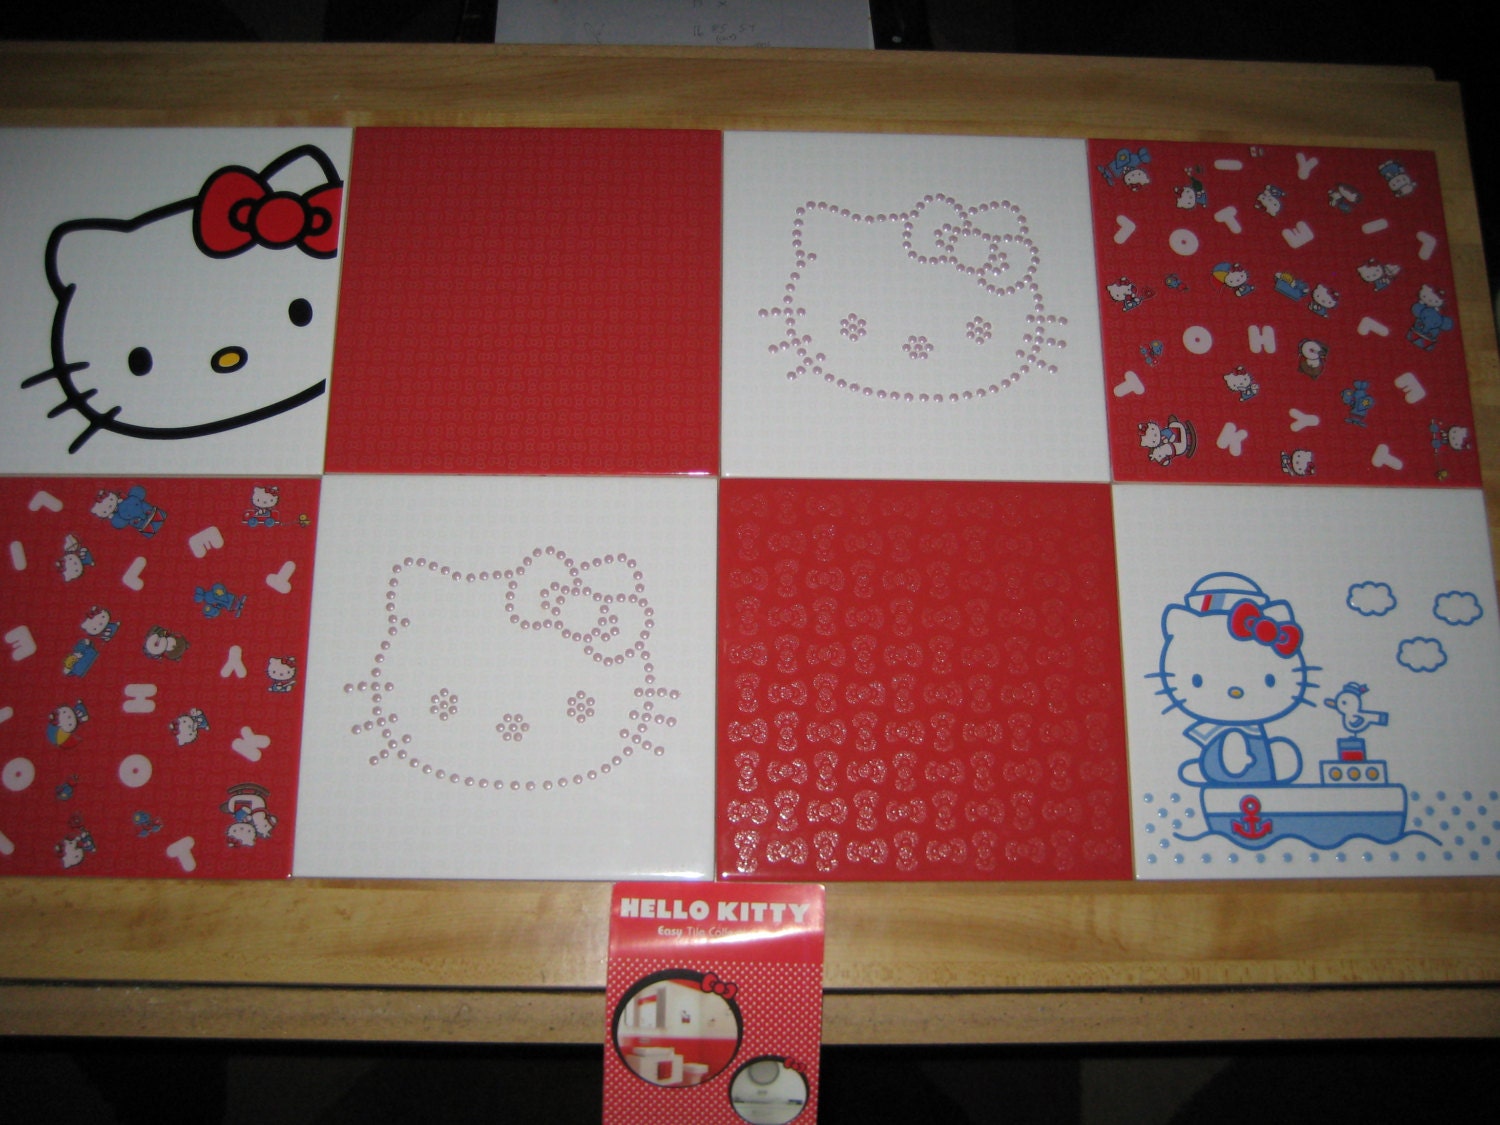  Hello  Kitty  Lovers 8 pcs Ceramic 8x8 Tiles  by bellatile on 